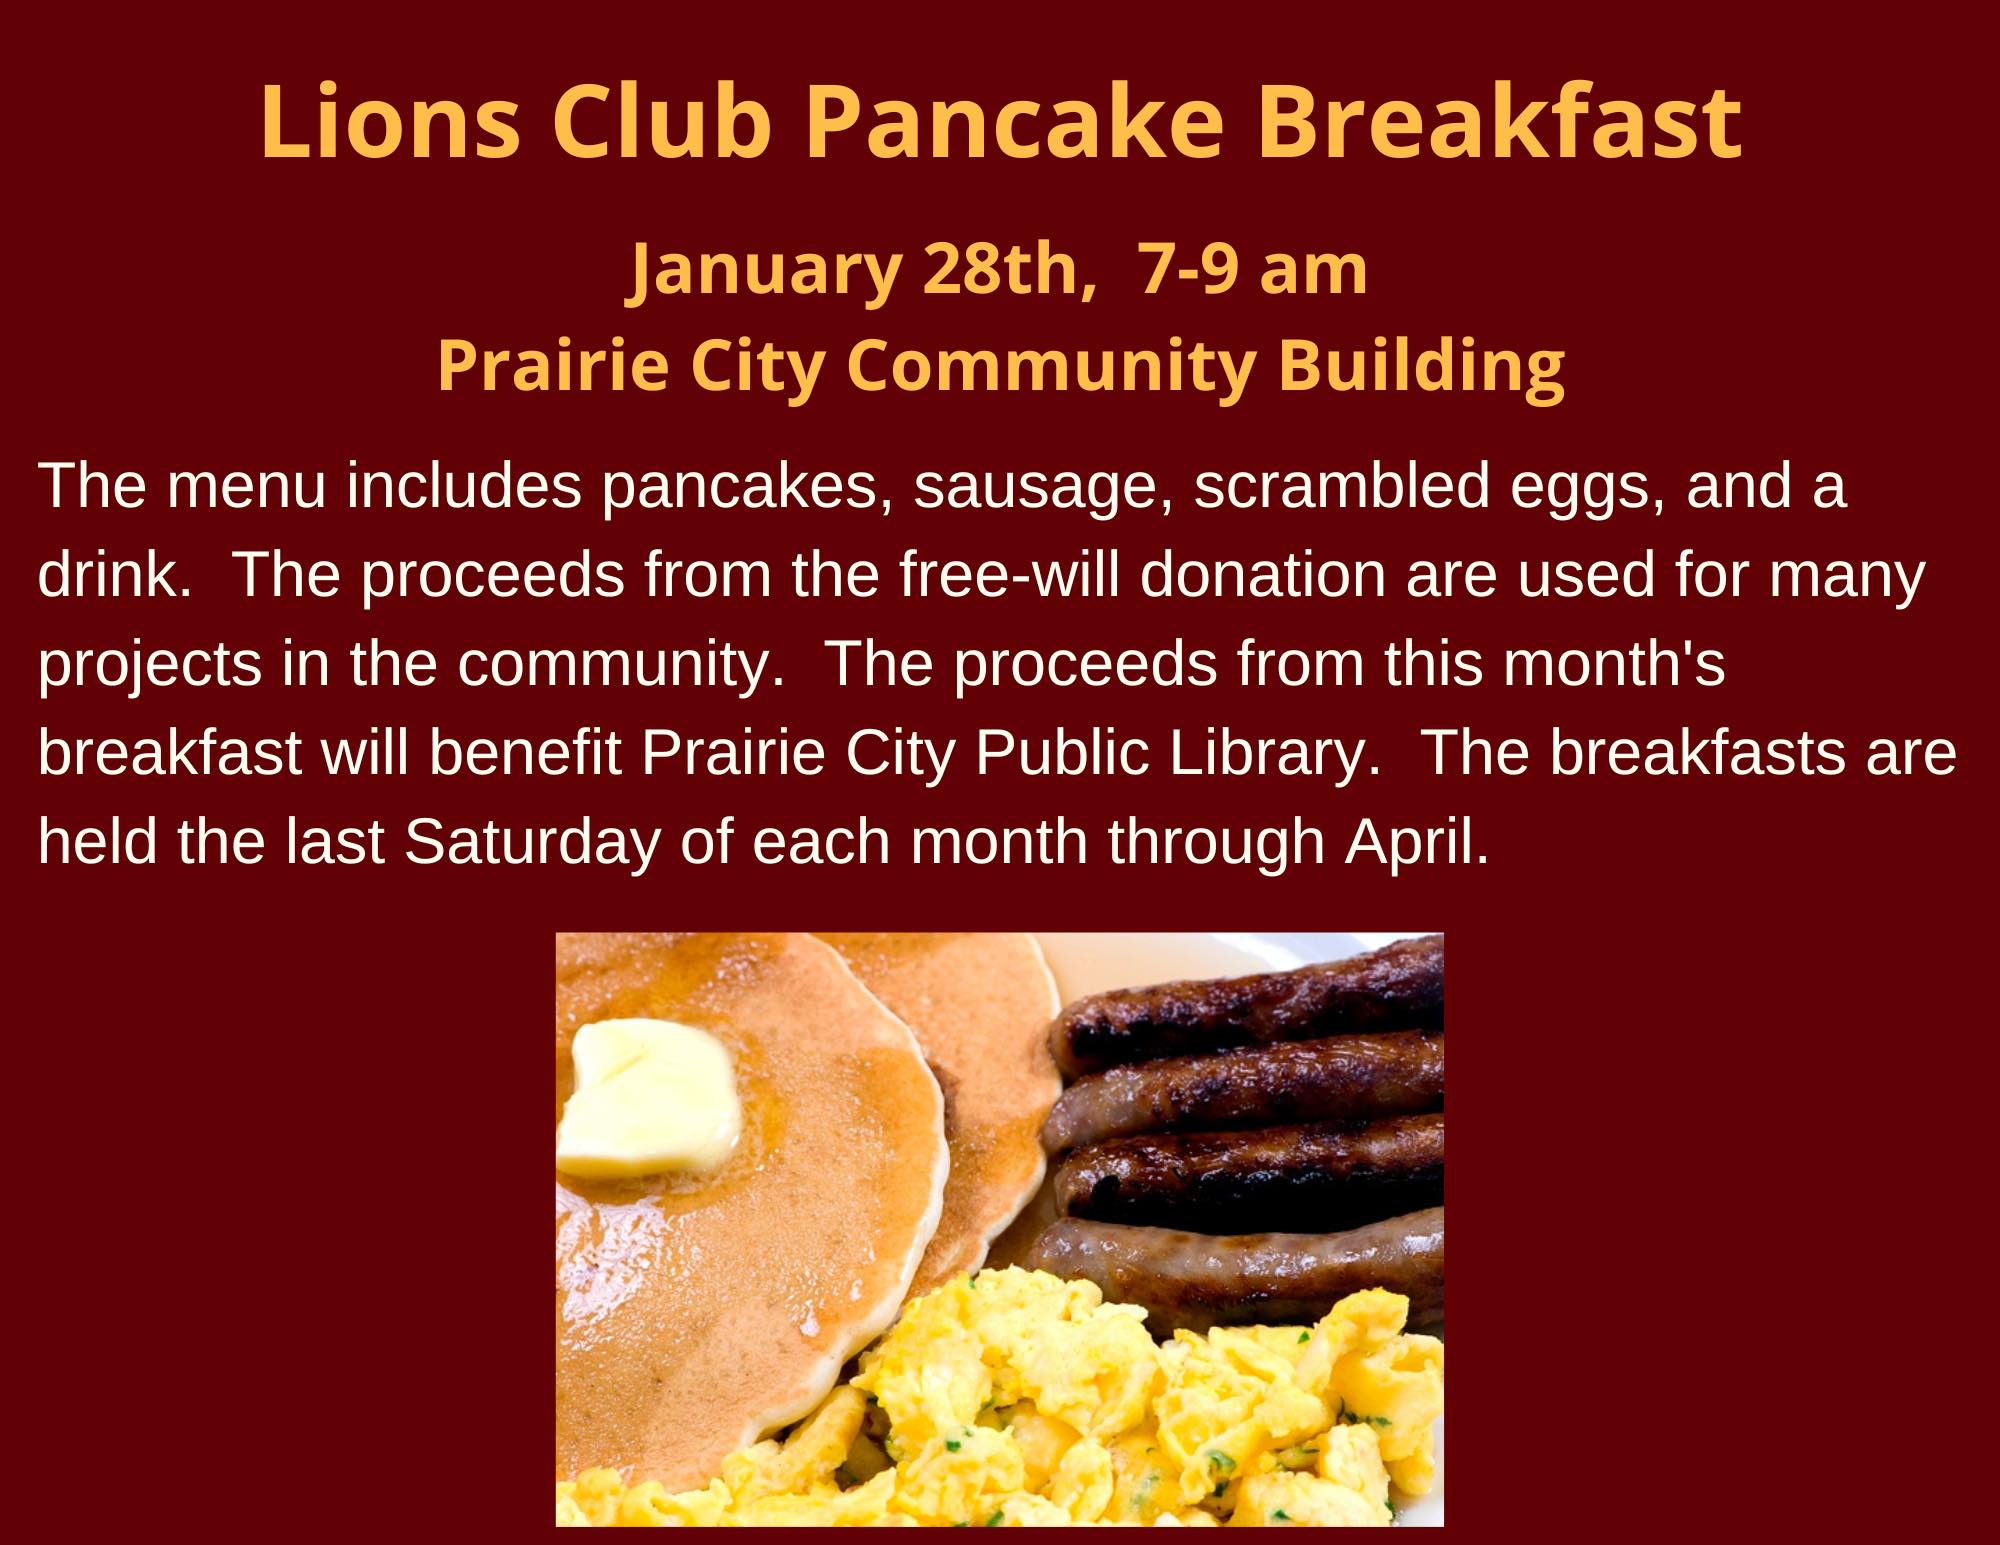 Event Promo Photo For Lions Club Pancake Breakfast benefitting the Prairie City Public Library